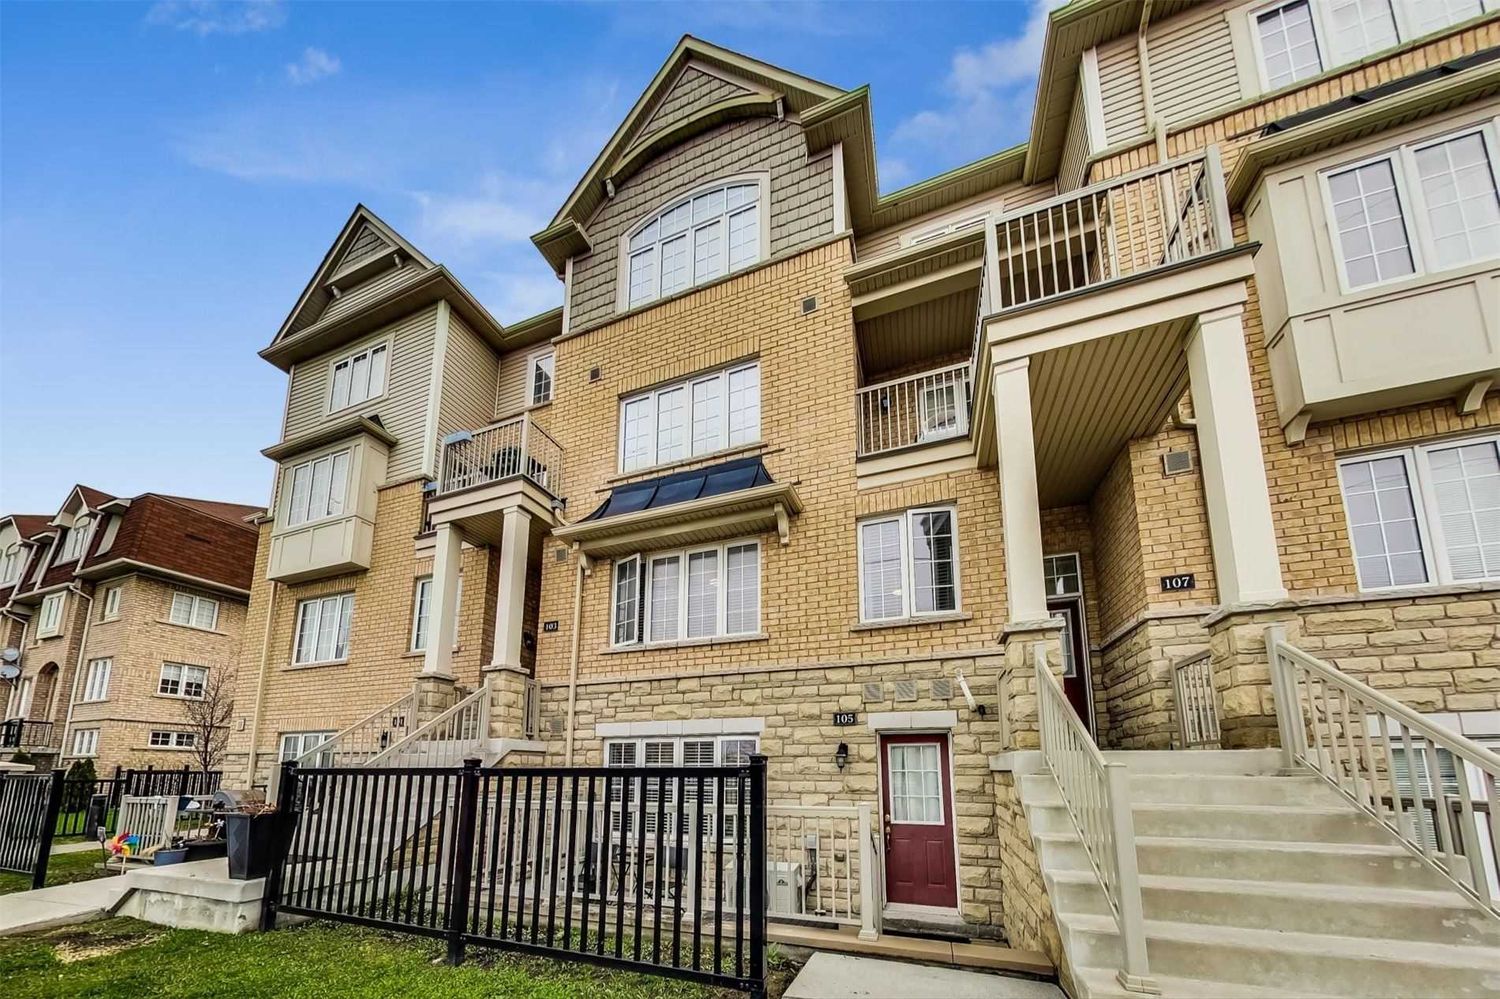 97-115 Chapman Drive. Townsgate Townhomes is located in  Ajax, Toronto - image #2 of 3